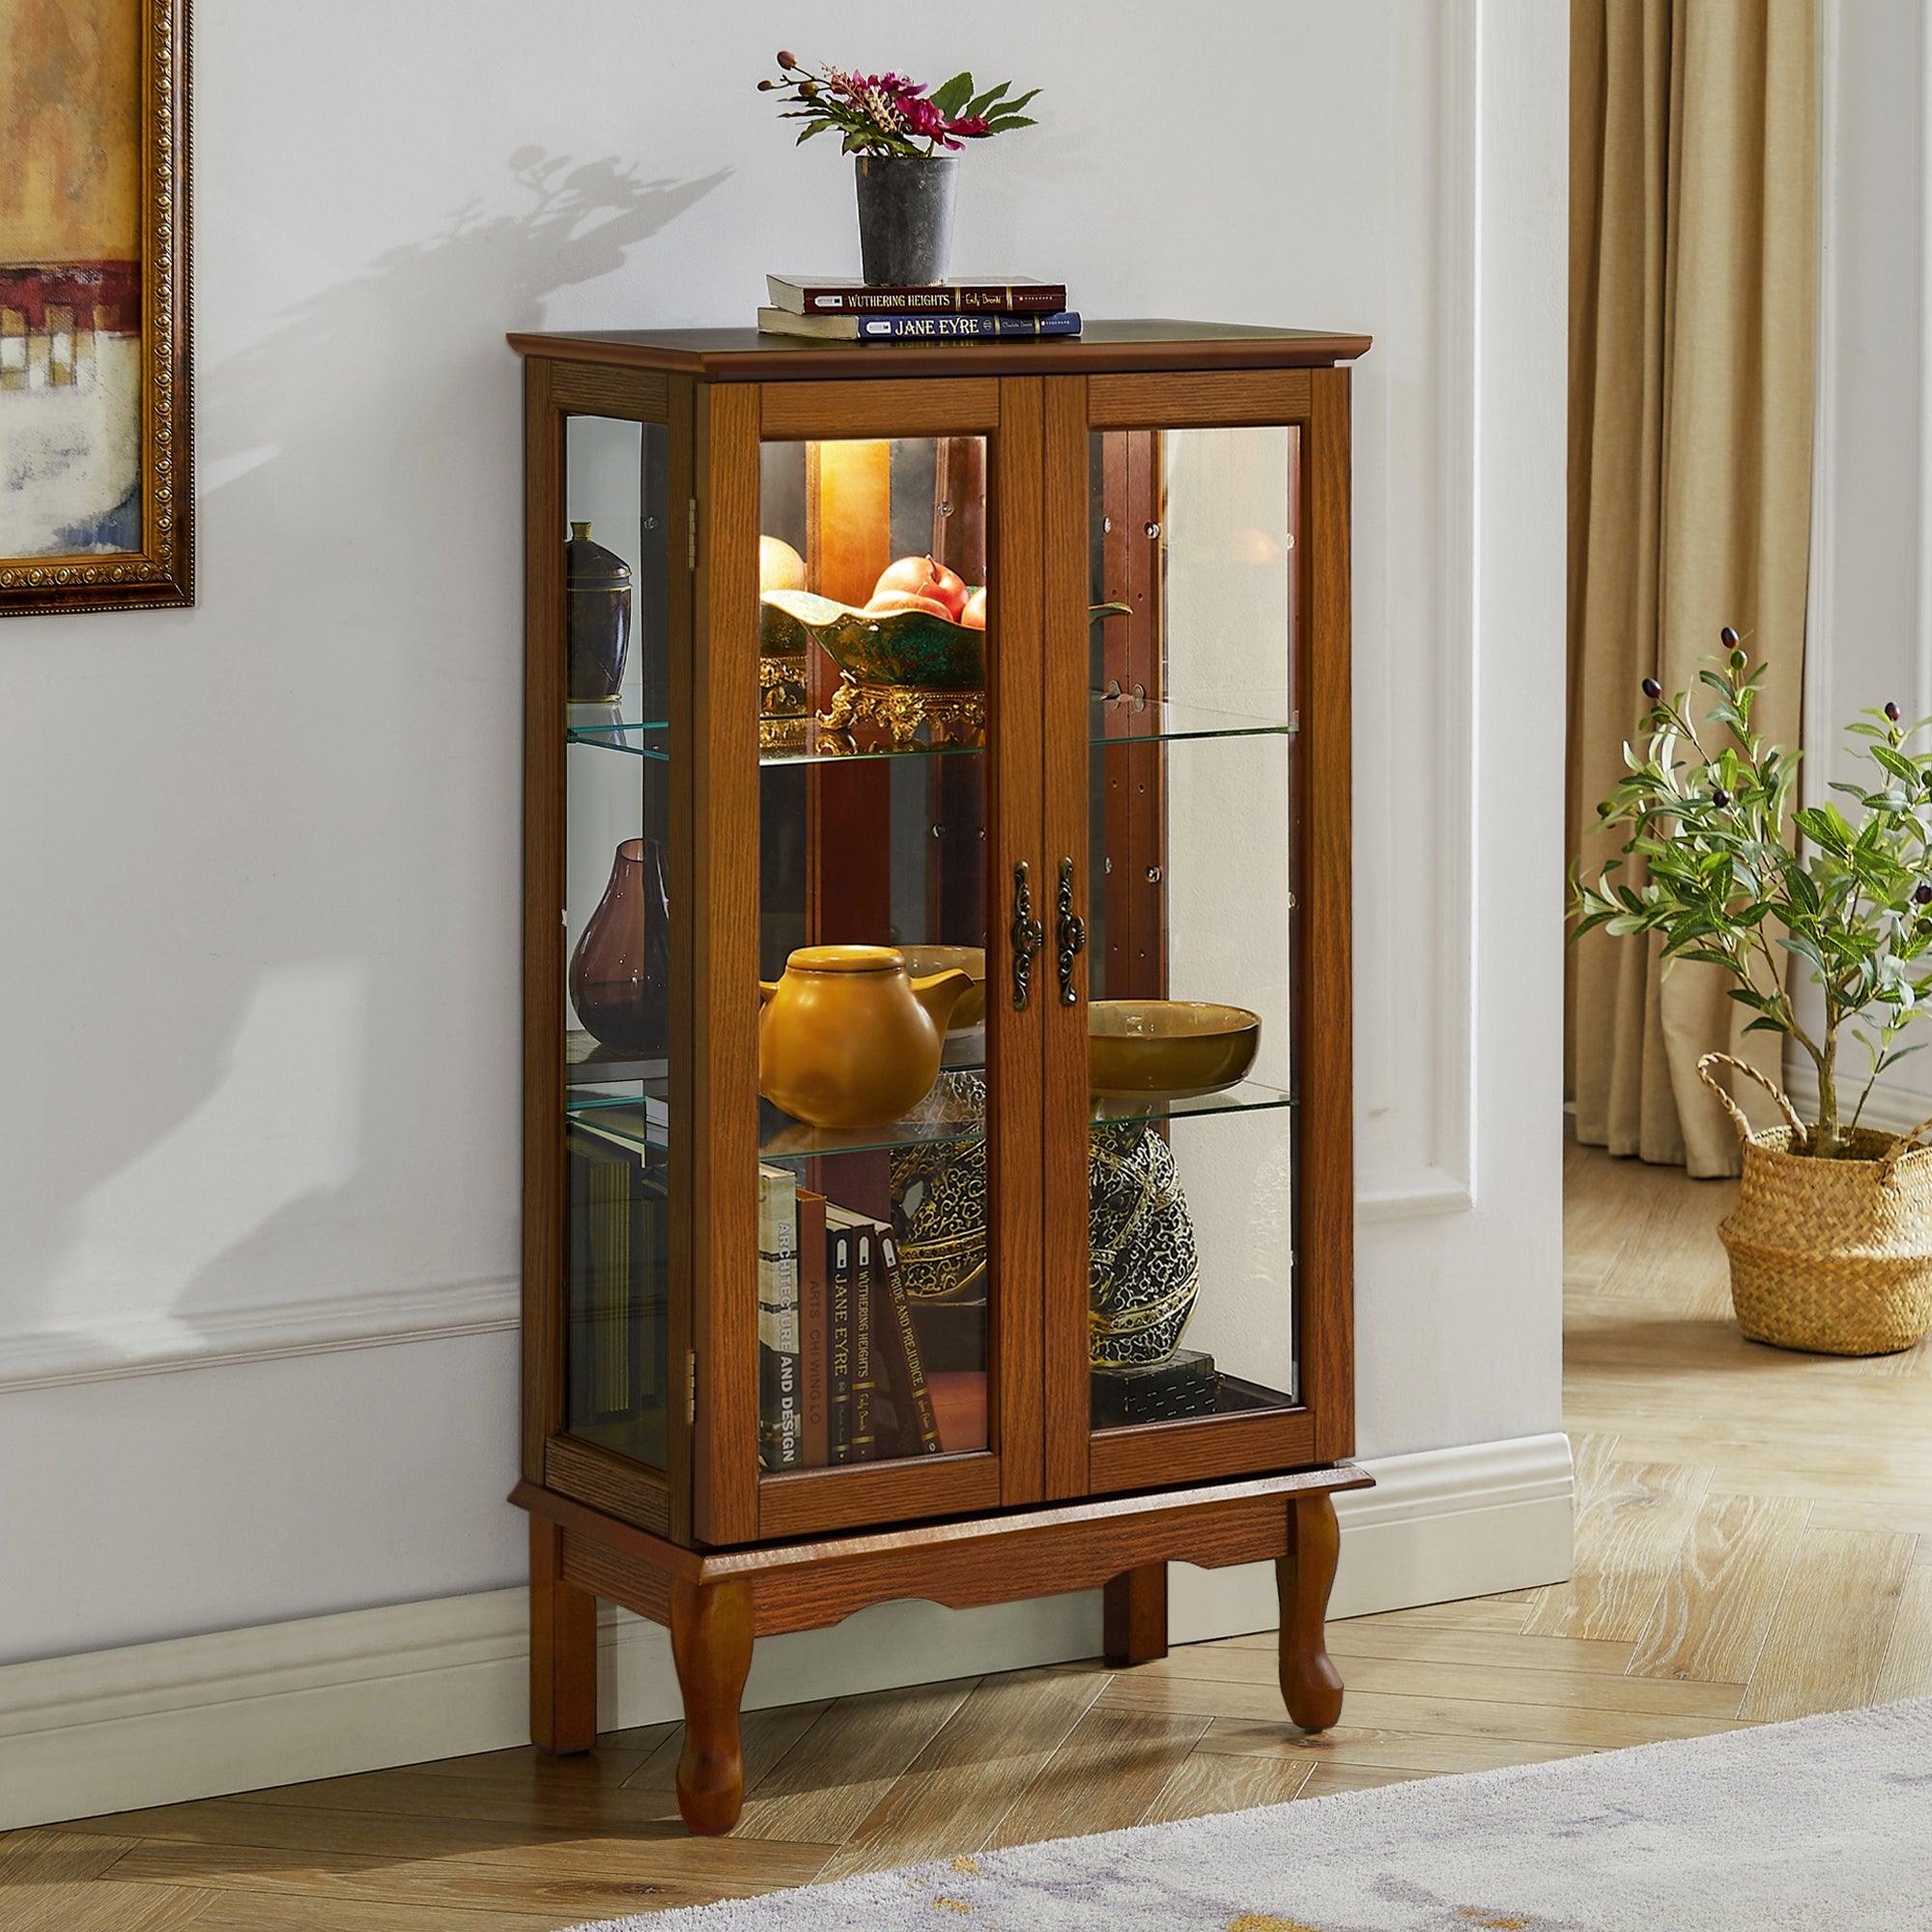 🆓🚛 3 Tier Curio Cabinet Lighted Diapaly Cabinet With Adjustable Shelves & Mirrored Back Panel, Tempered Glass Doors Oak, (E26 Light Bulb Not Included)